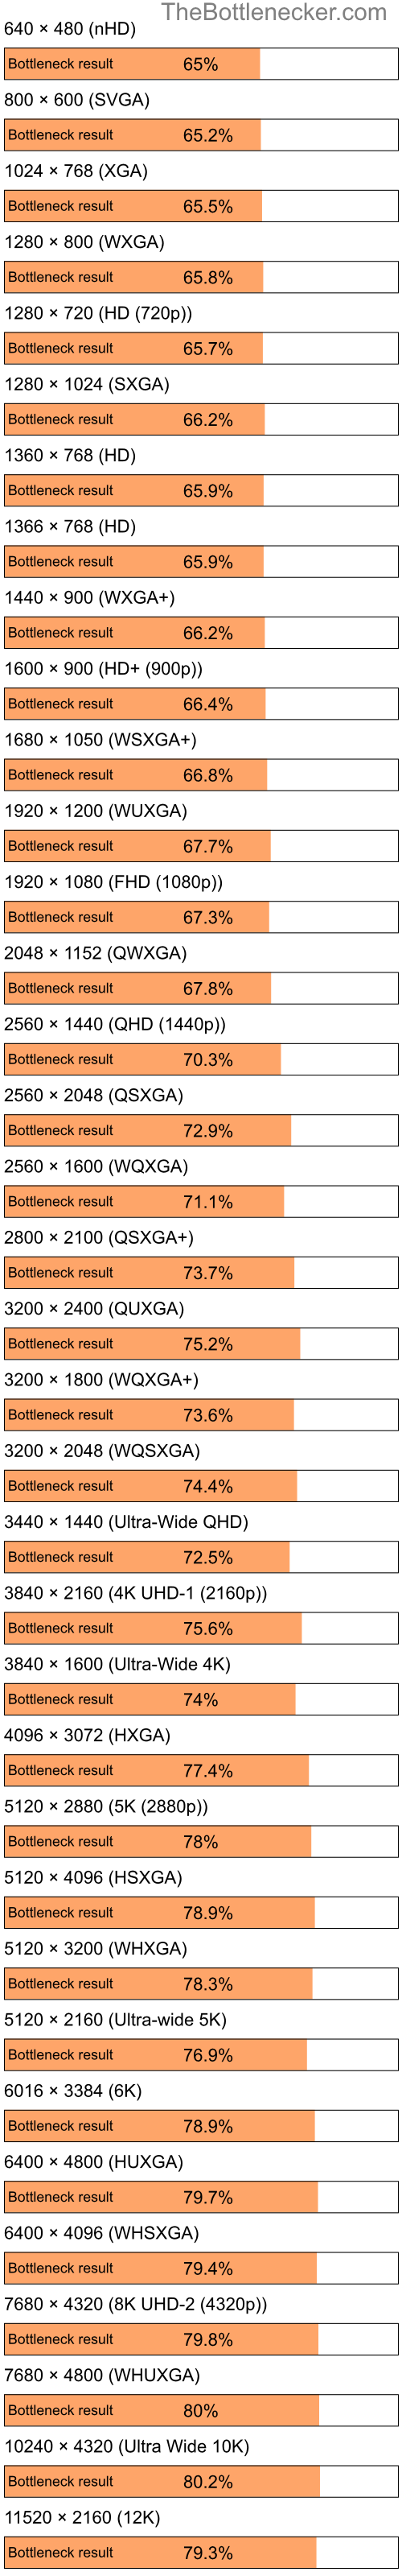 Bottleneck results by resolution for Intel Atom N280 and NVIDIA GeForce G210 in7 Days to Die